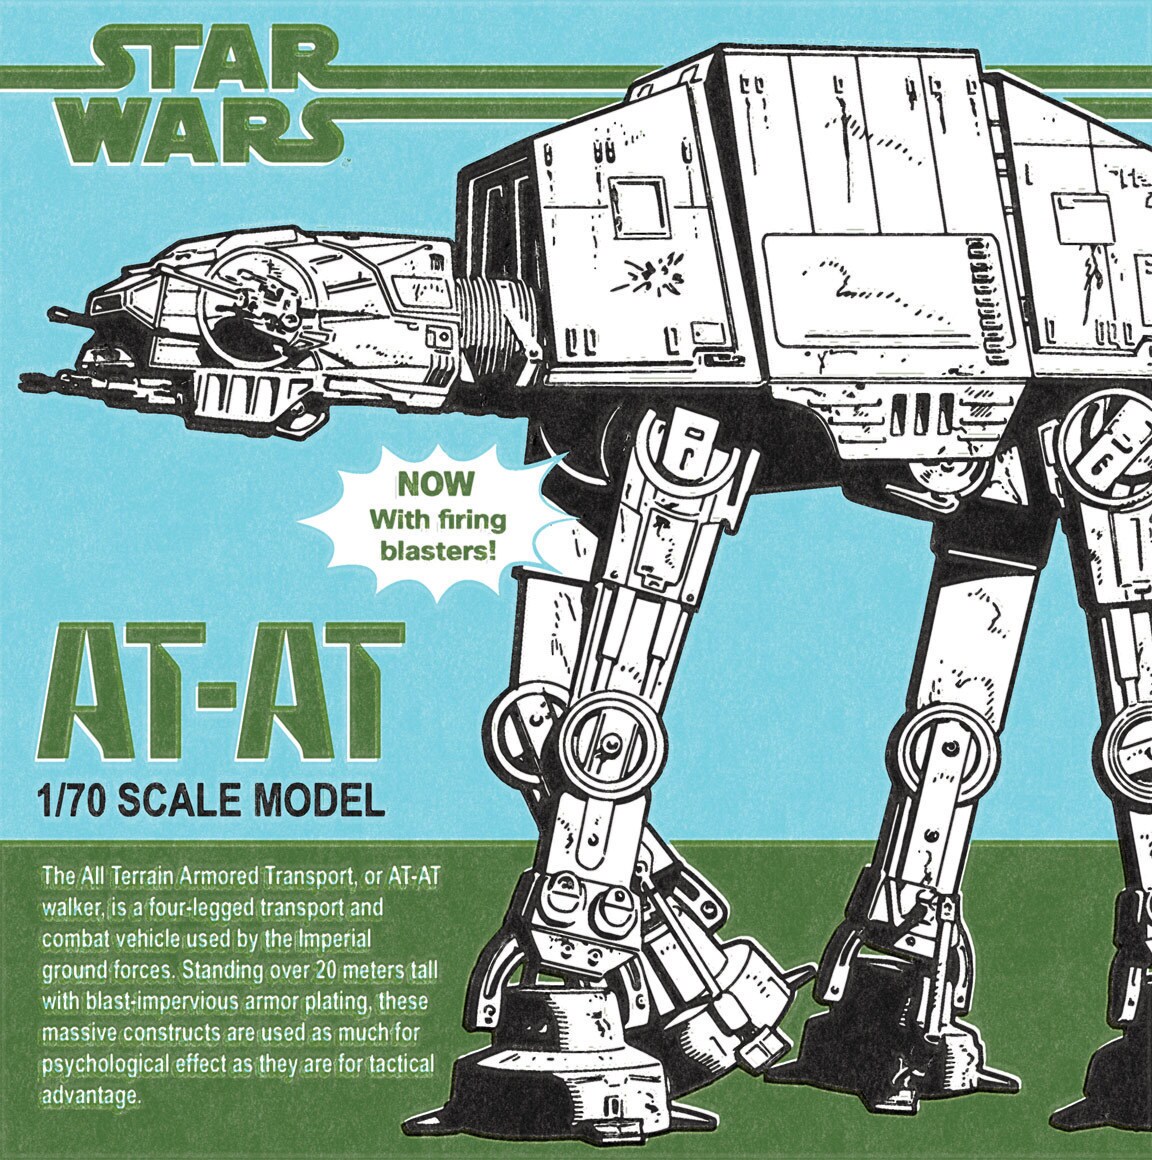 AT-AT 1/70th scale model ad